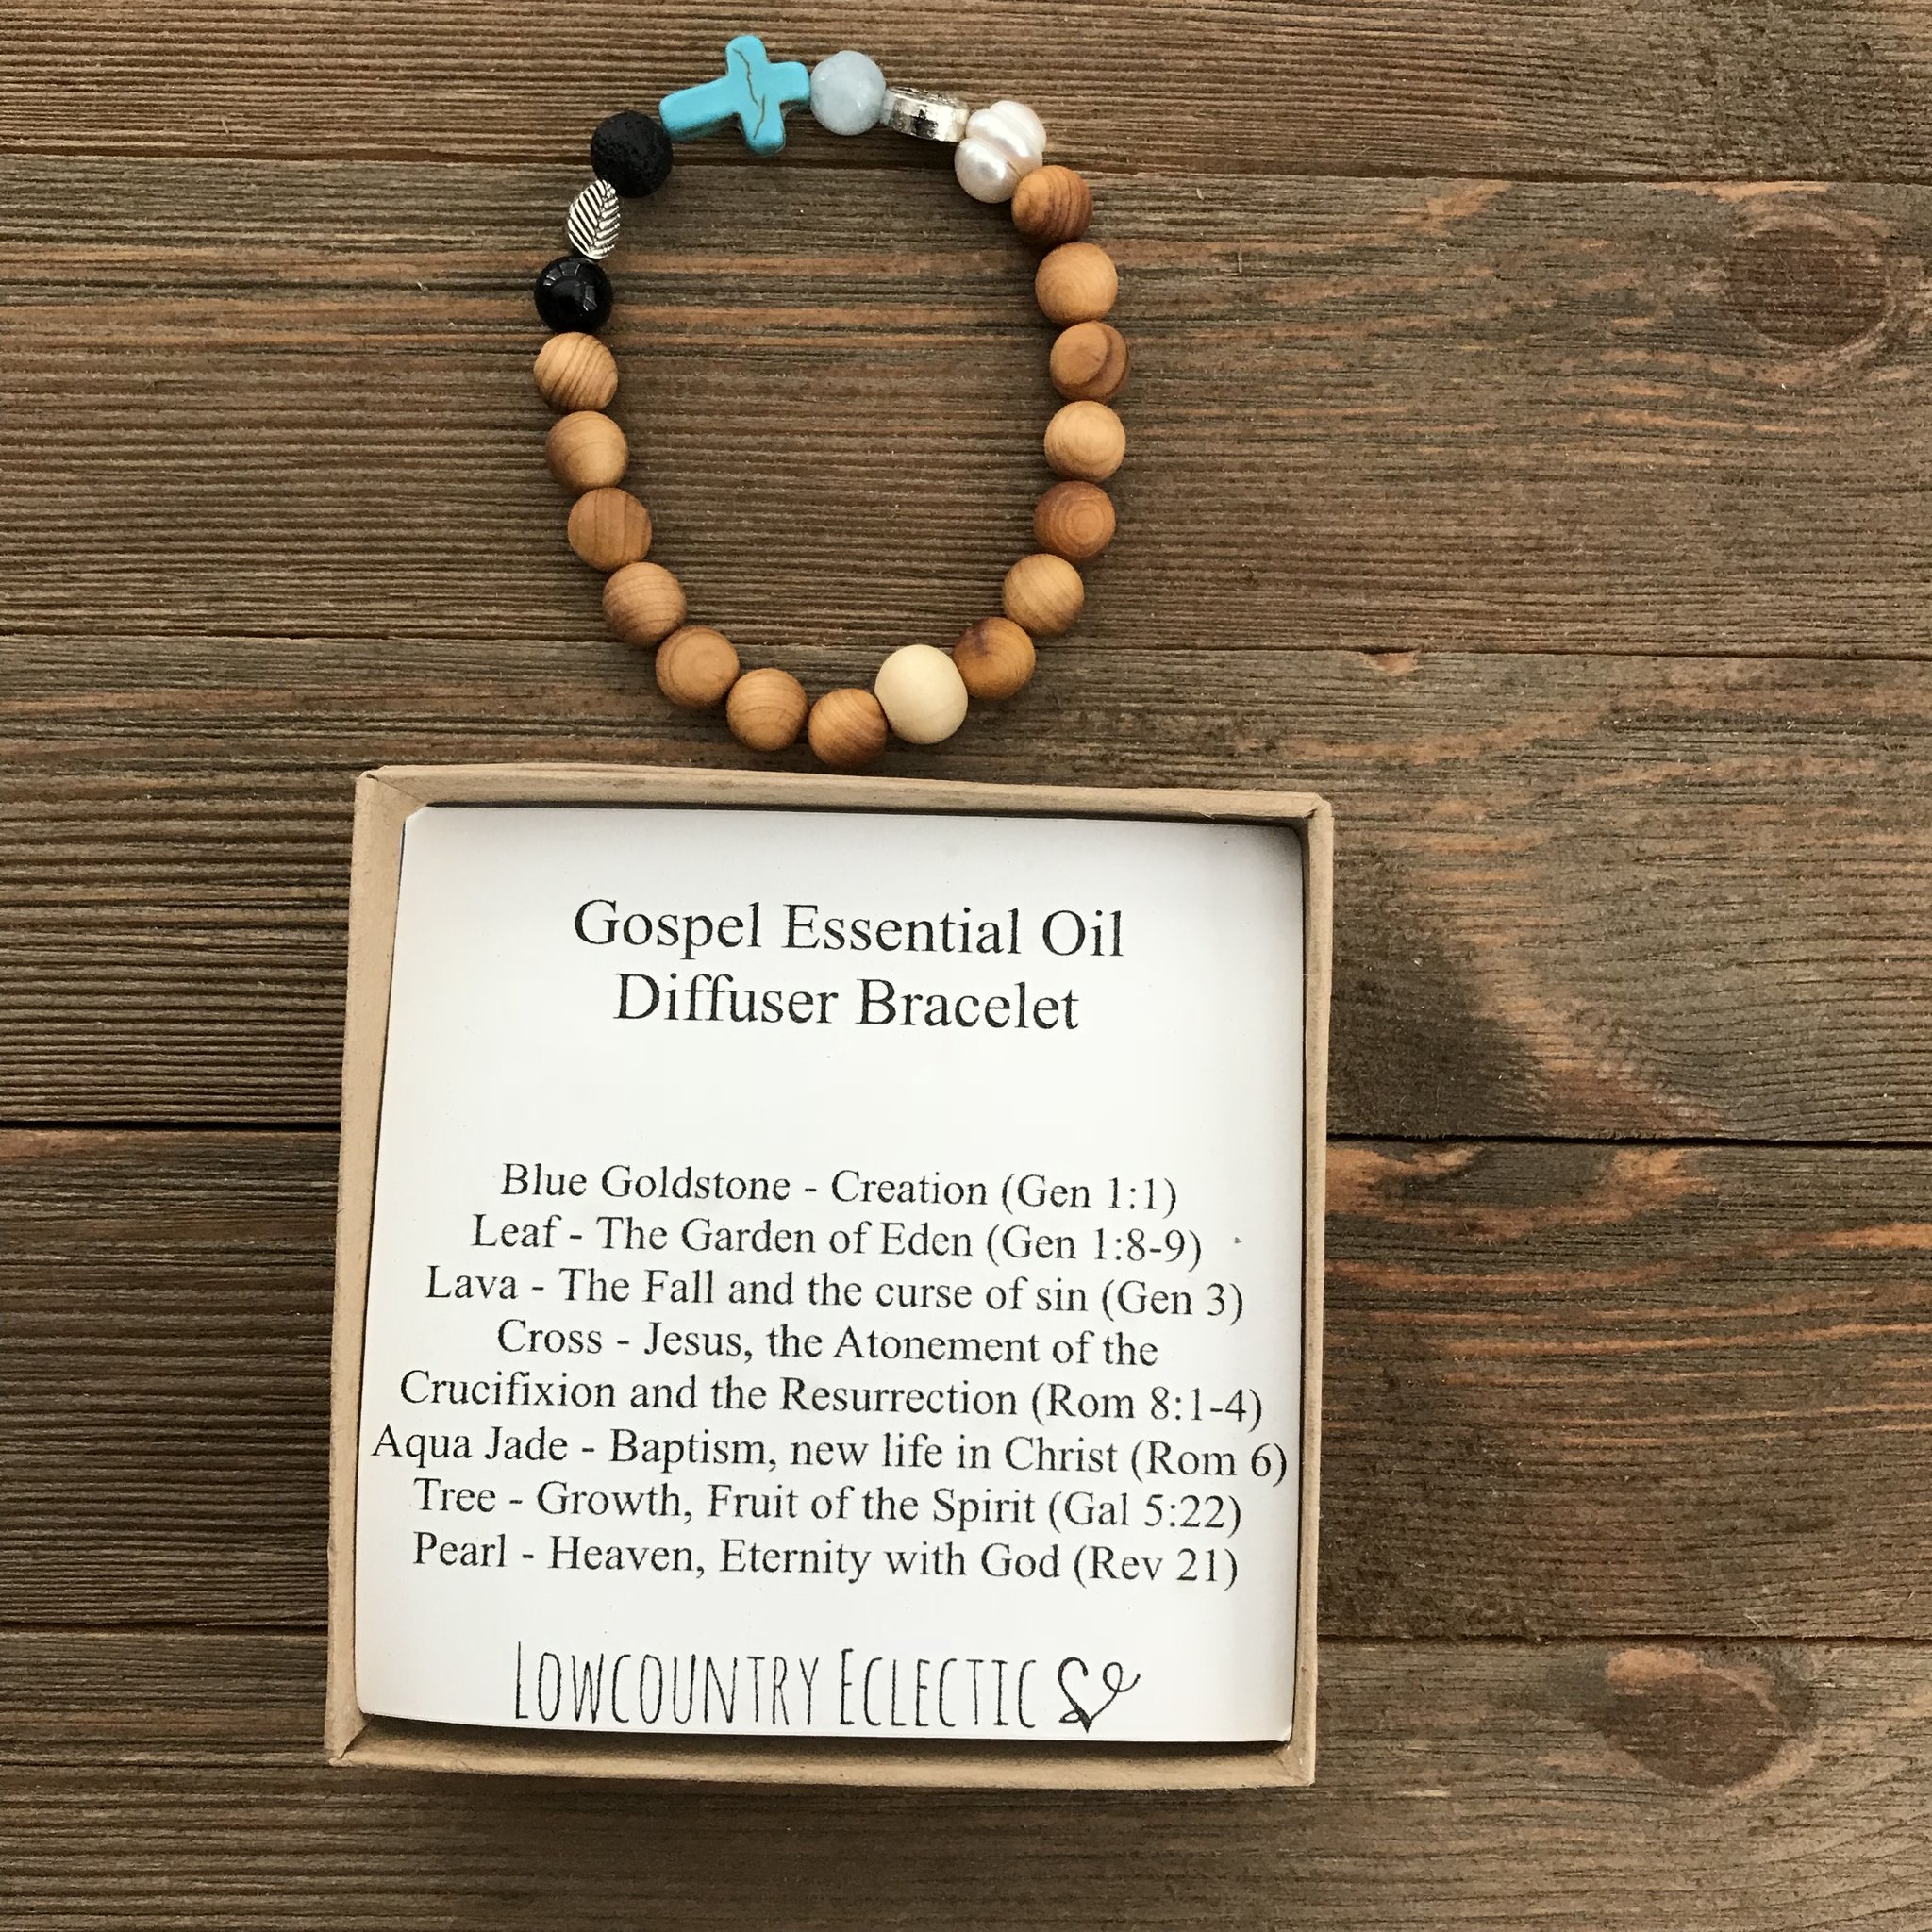 A Gospel Essential Oil Diffuser Bracelet by Low-Country Eclectic